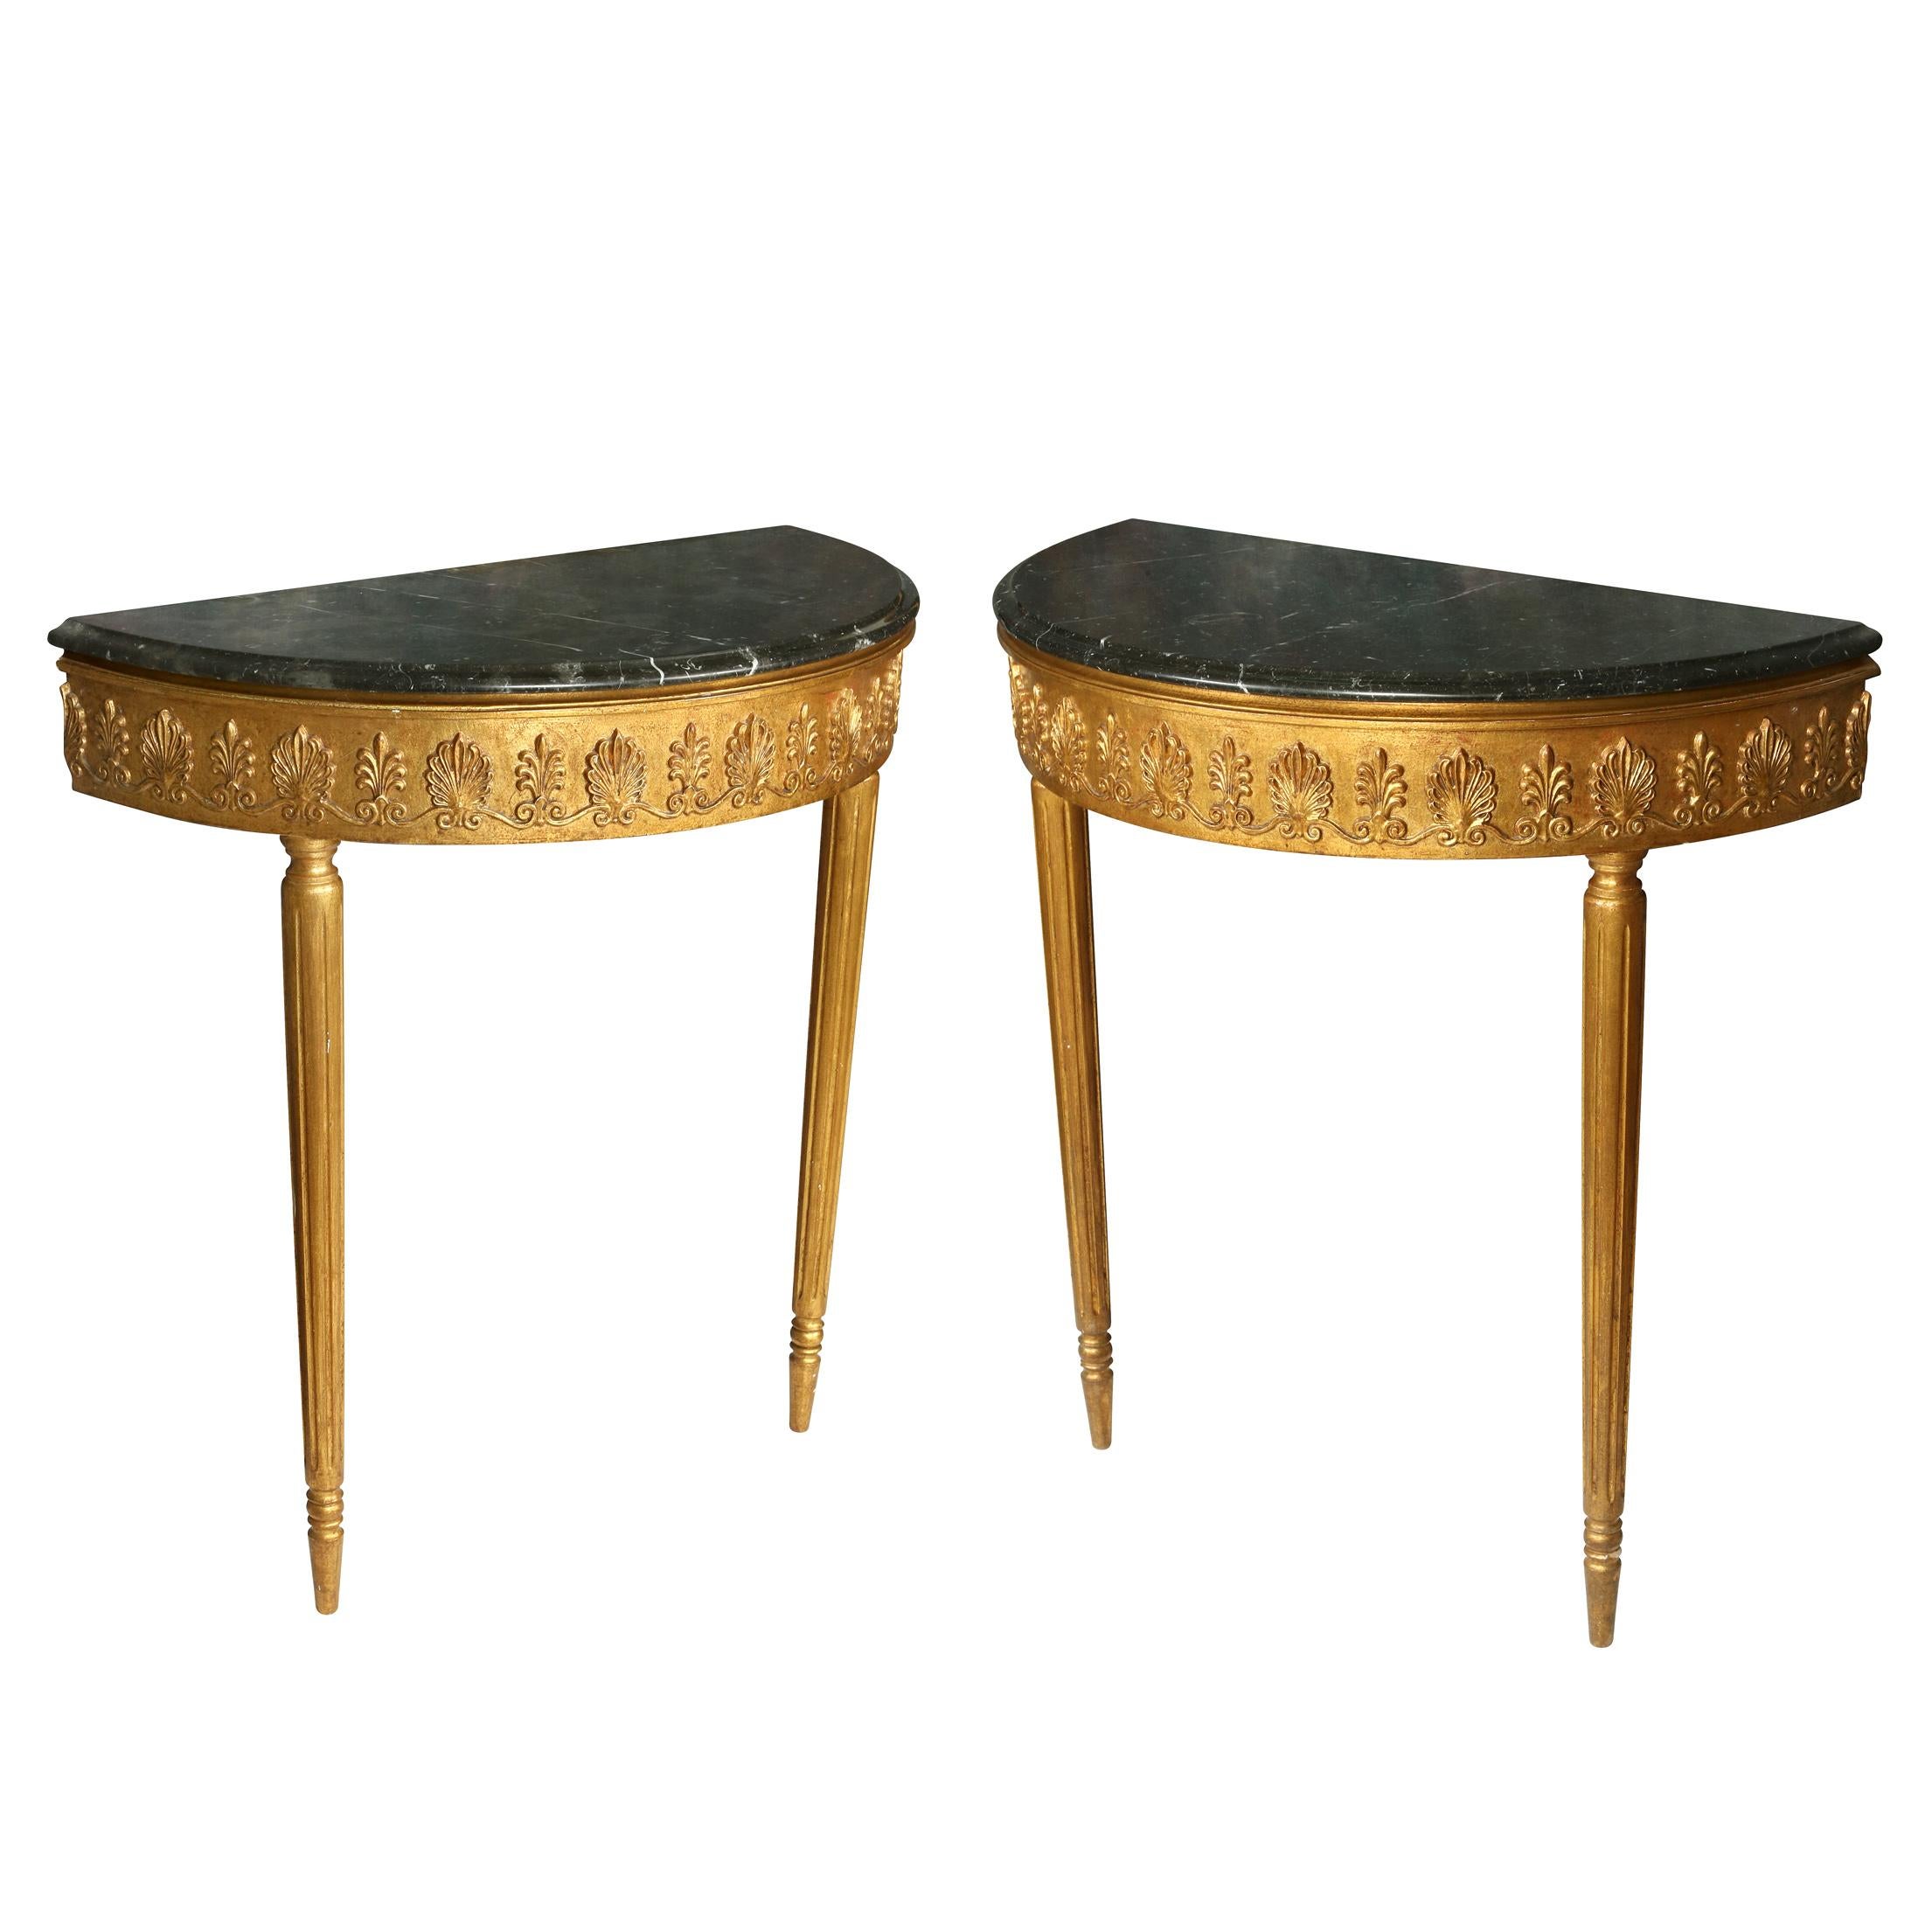 A pair of Louis XV style giltwood demilune console tables with green marble tops.